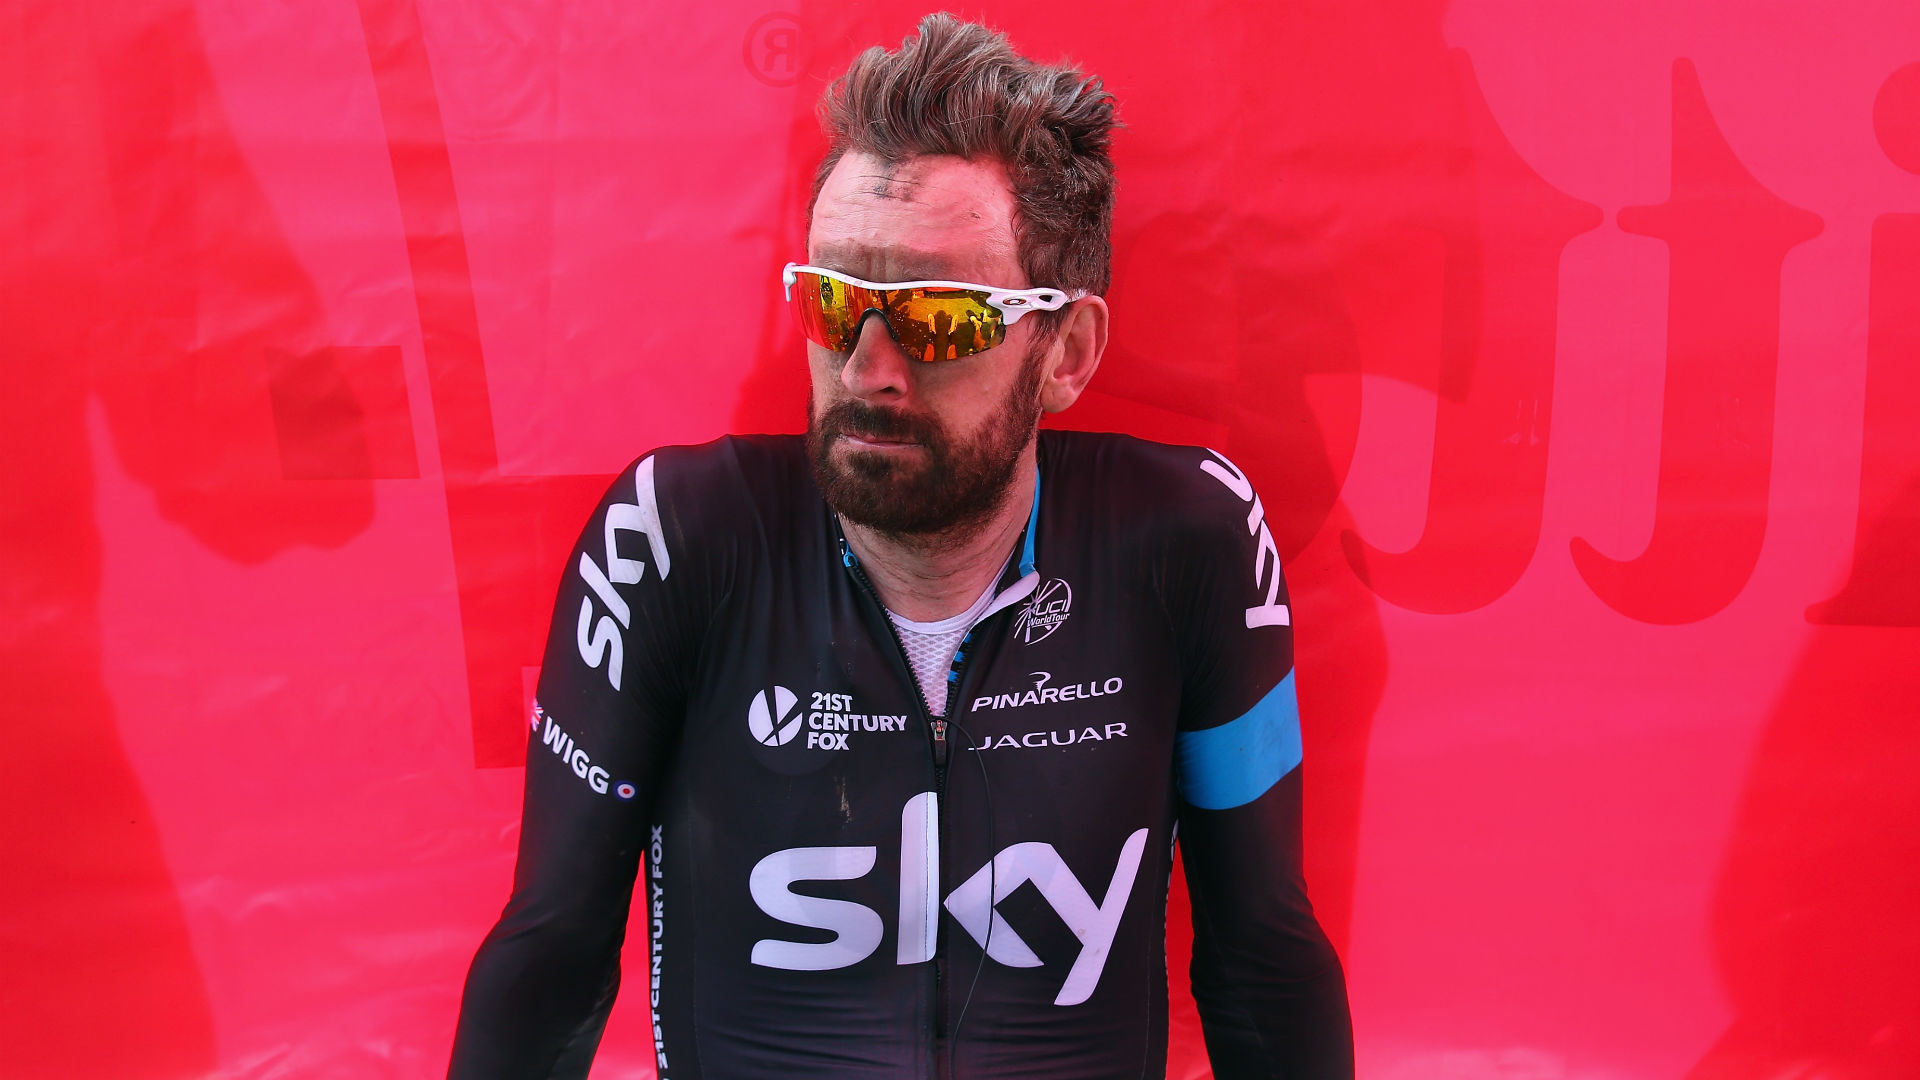 Team Sky should be investigated for any signs of anti-doping violations, according to UCI president David Lappartient.